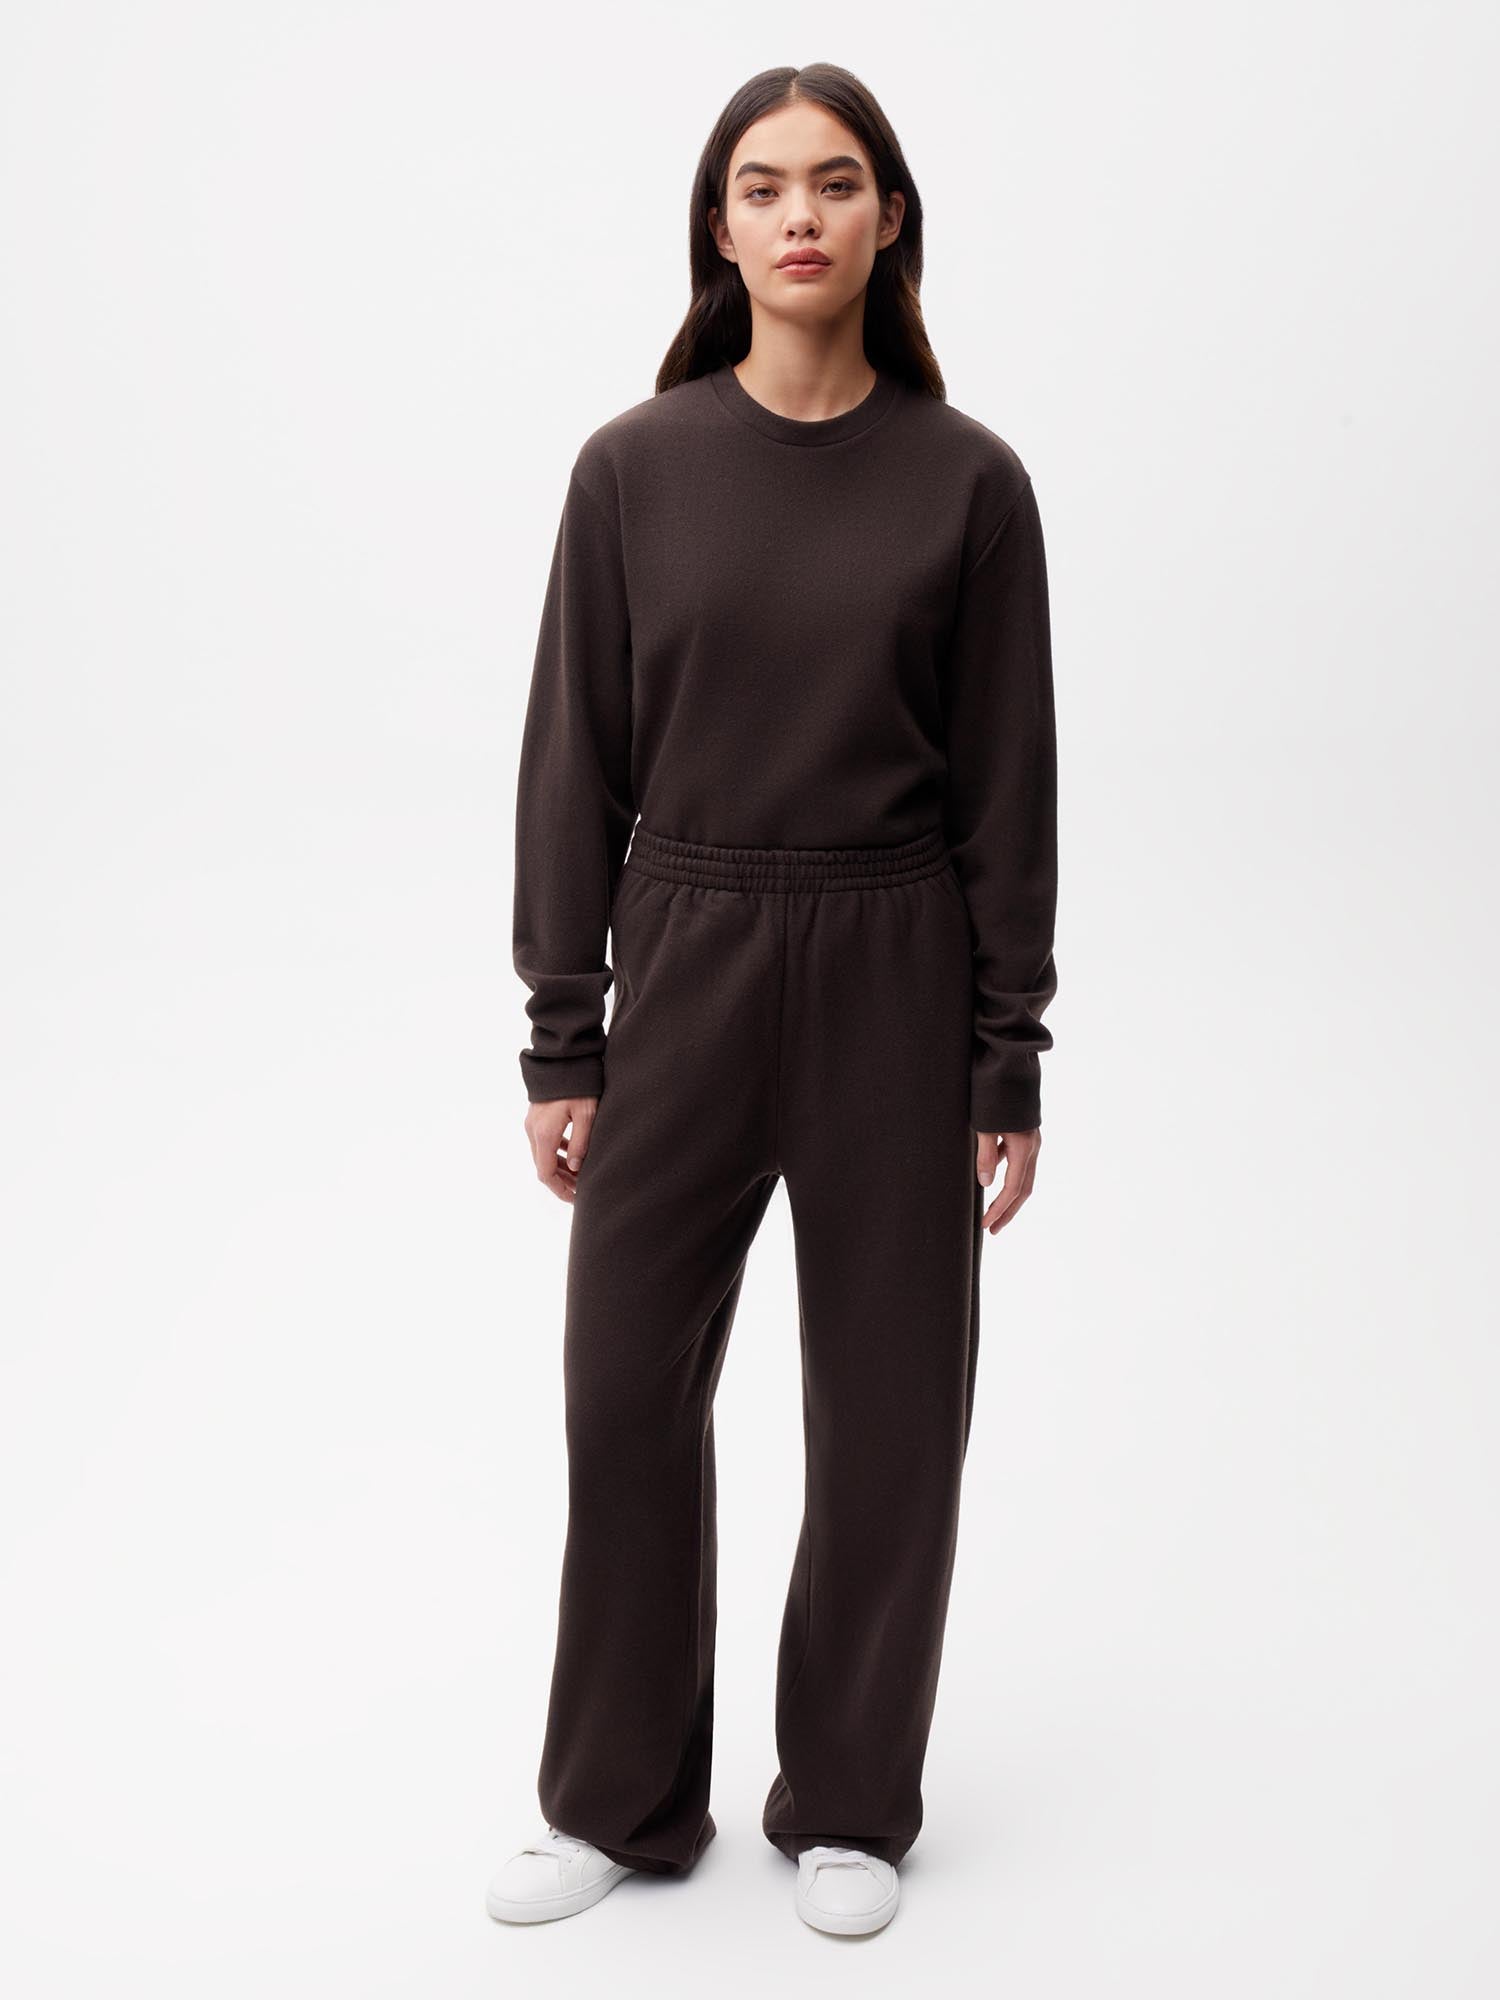 Recycled-Wool-Jersey-Pants-Chestnut-Brown-Female-1